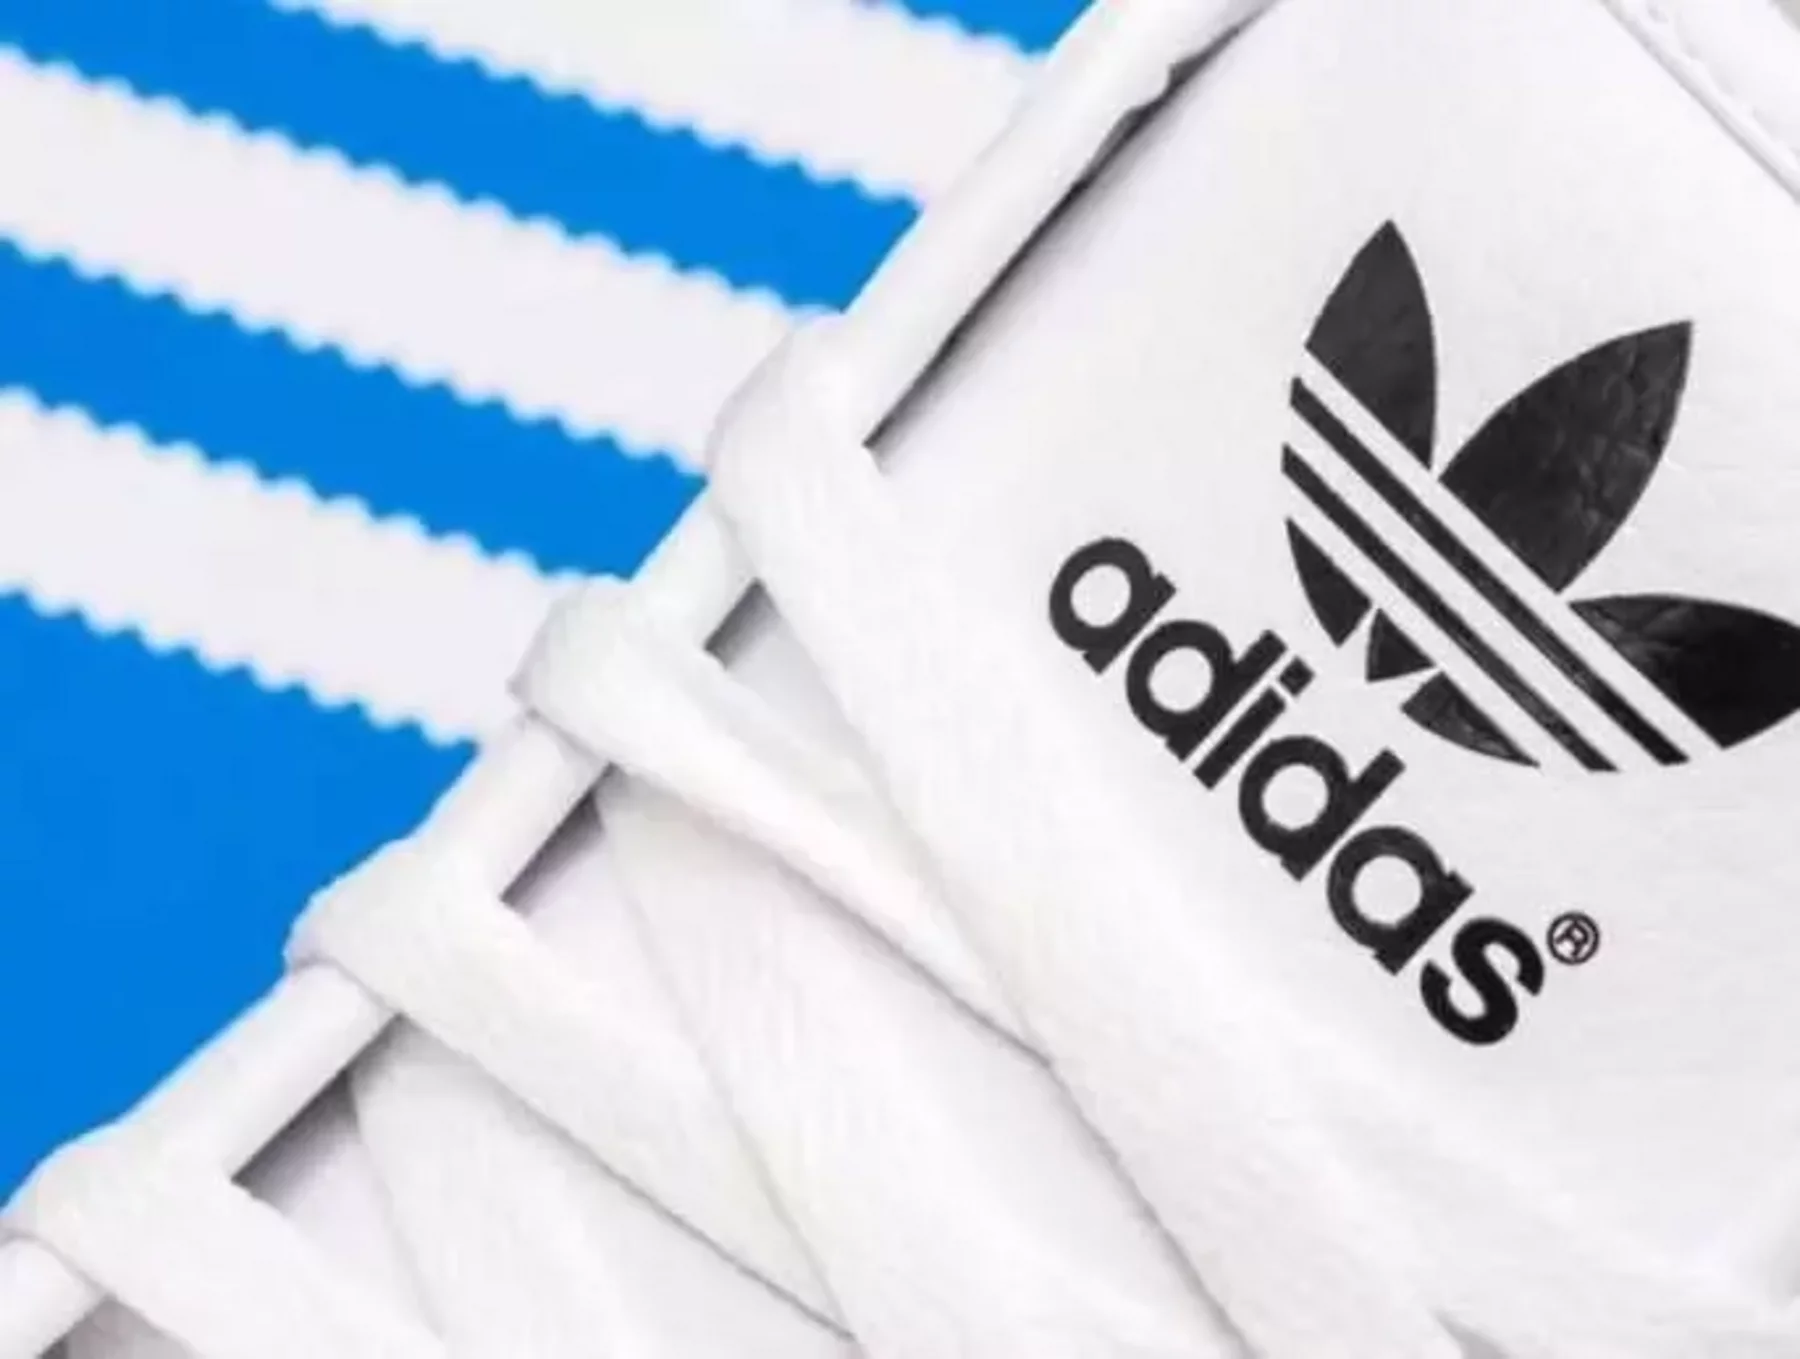 Adidas to open US factory | Manufacturing